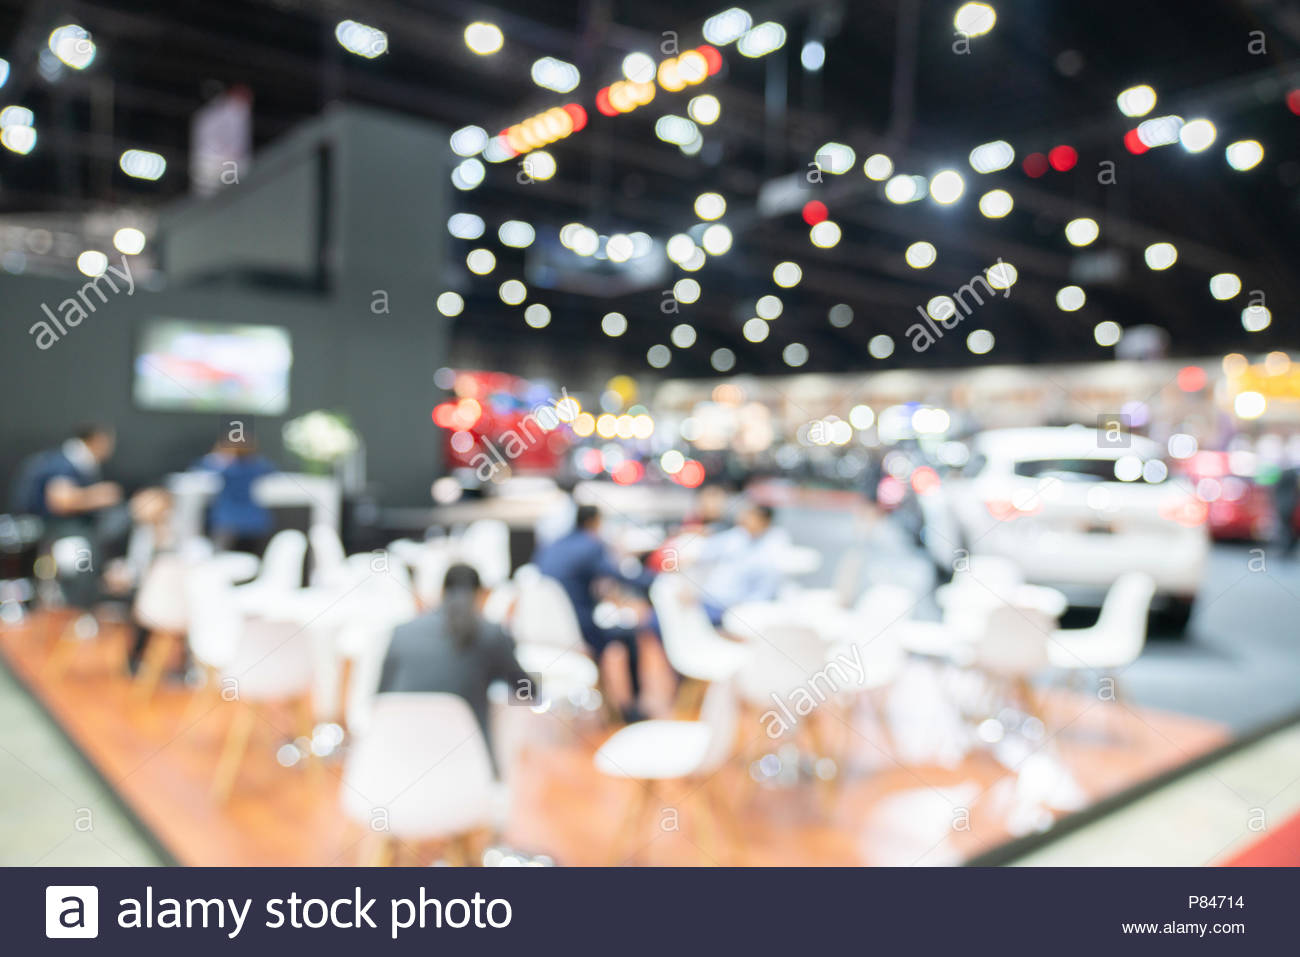 Abstract Blurred Defocused Trade Event Exhibition Background